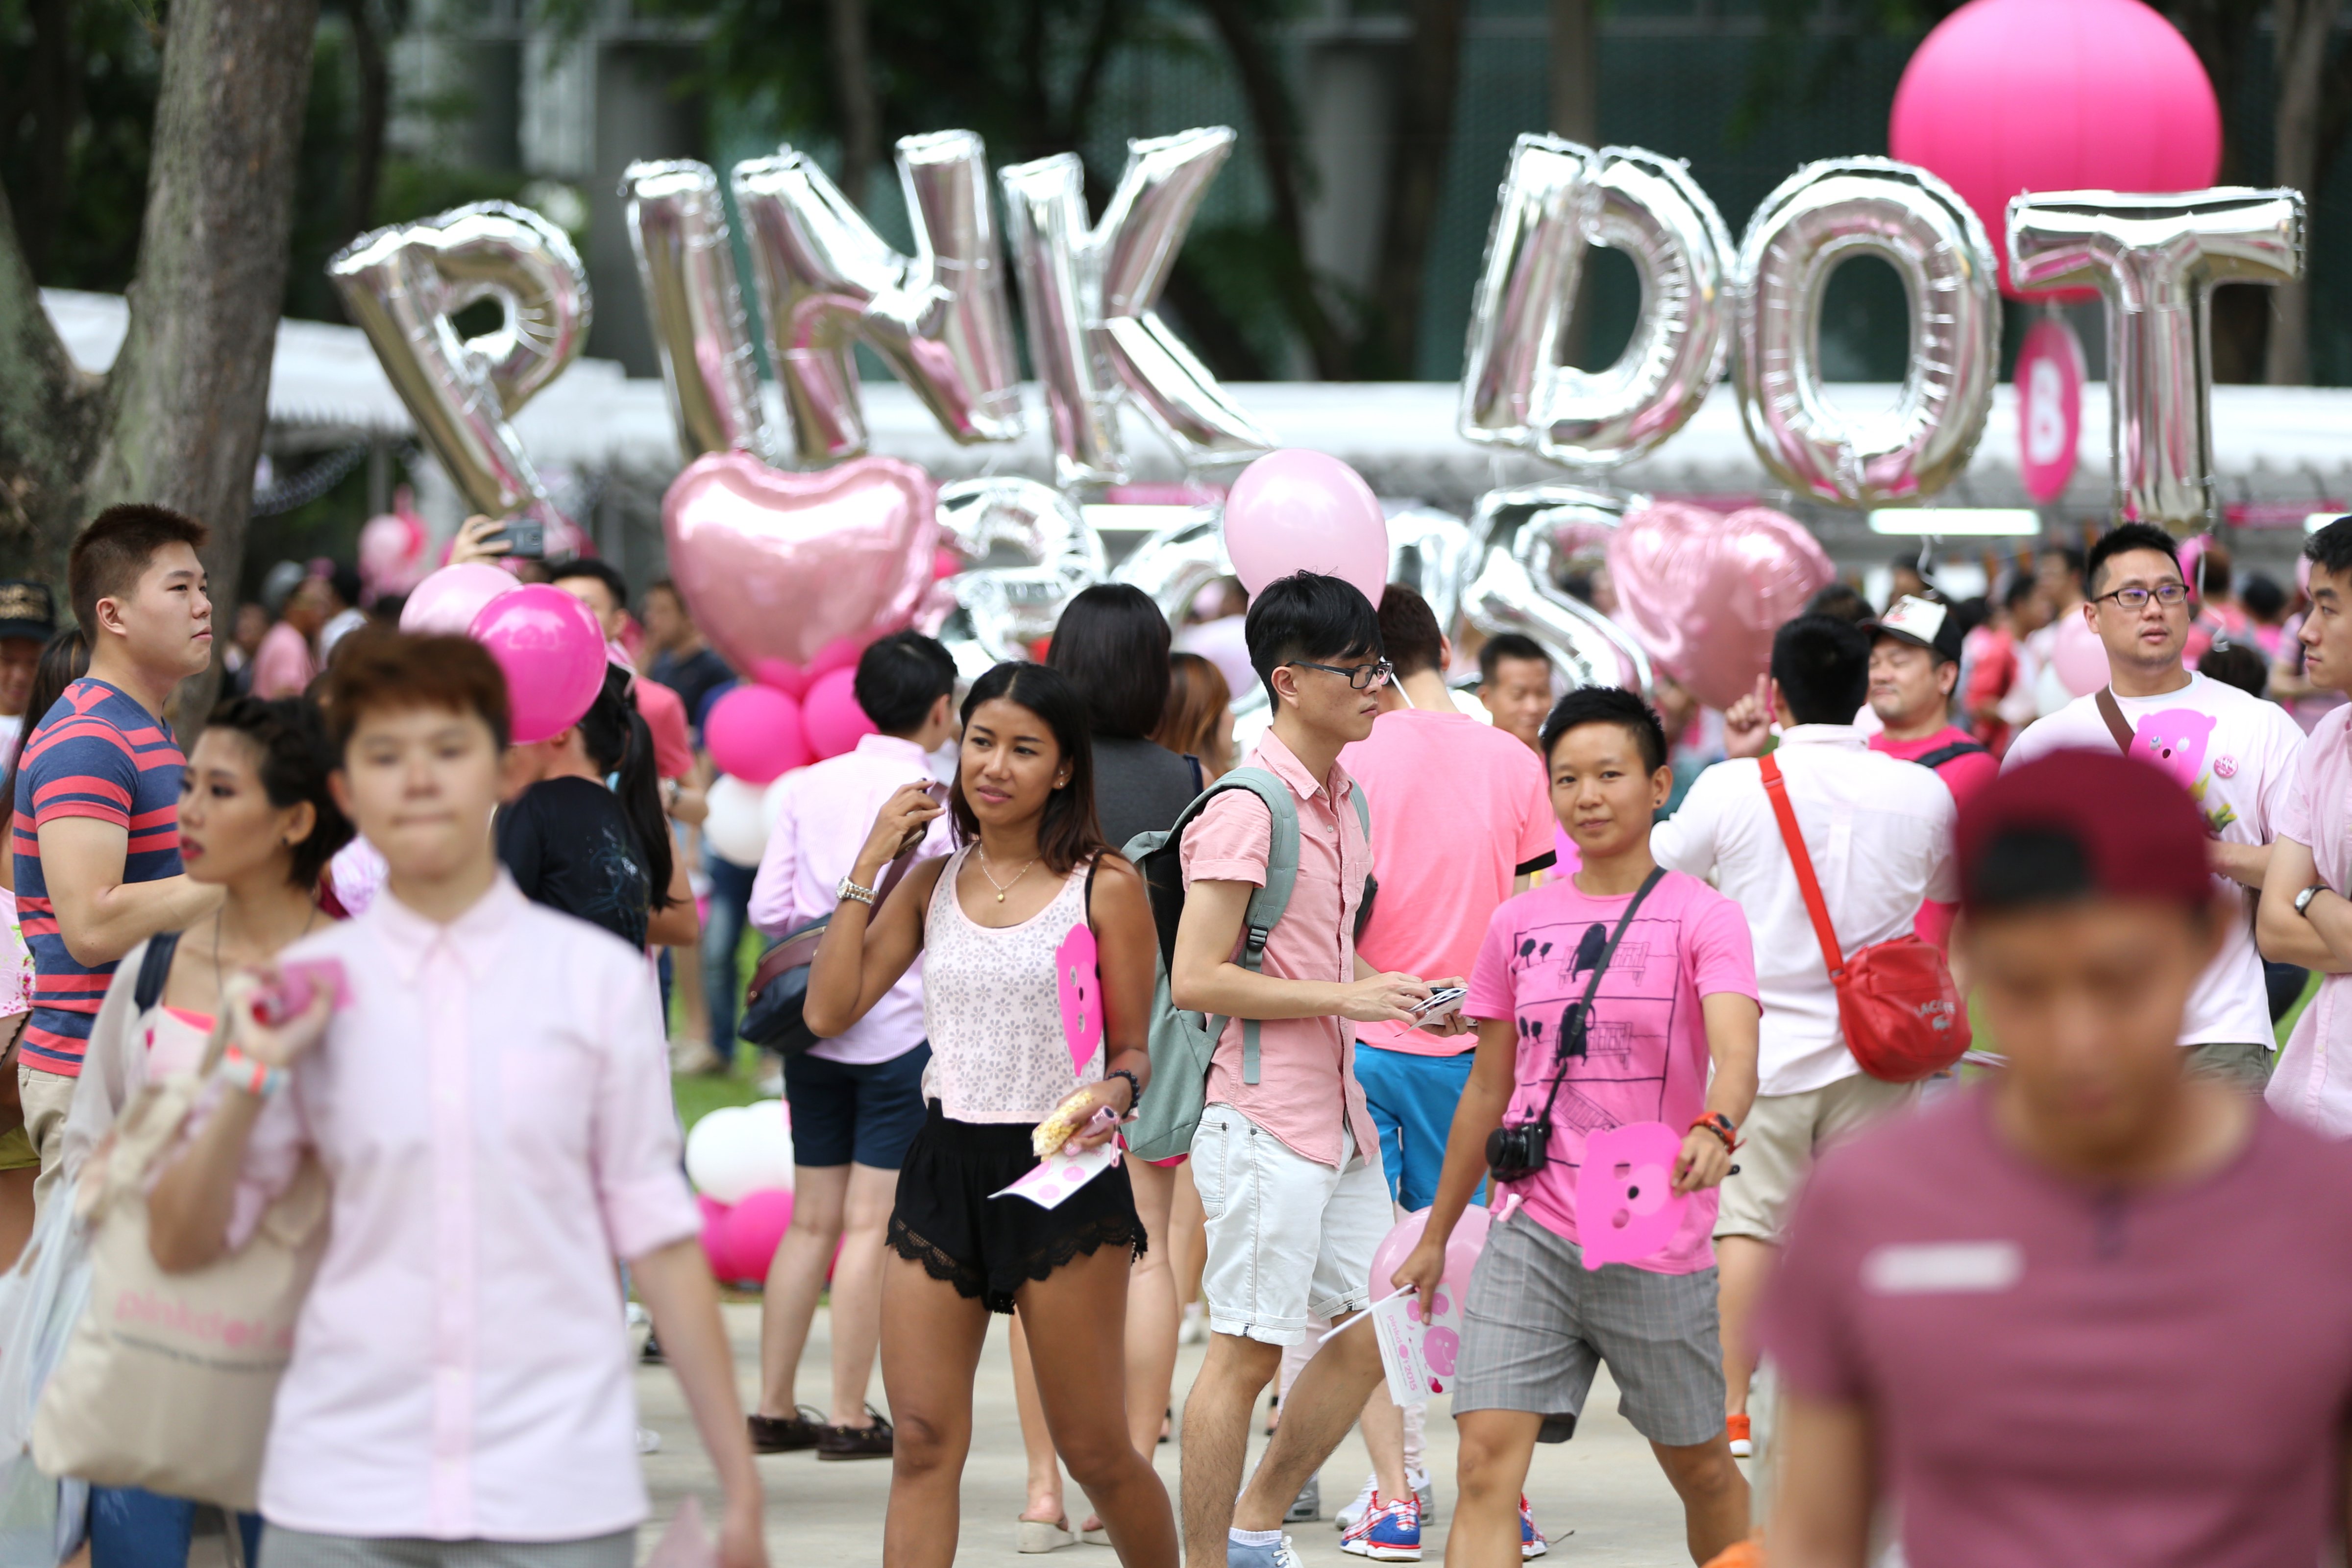 People dressed in various shades of pink attend Pink Dot SG on June 13, 2015 in Singapore (Lionel Ng—Getty Images)